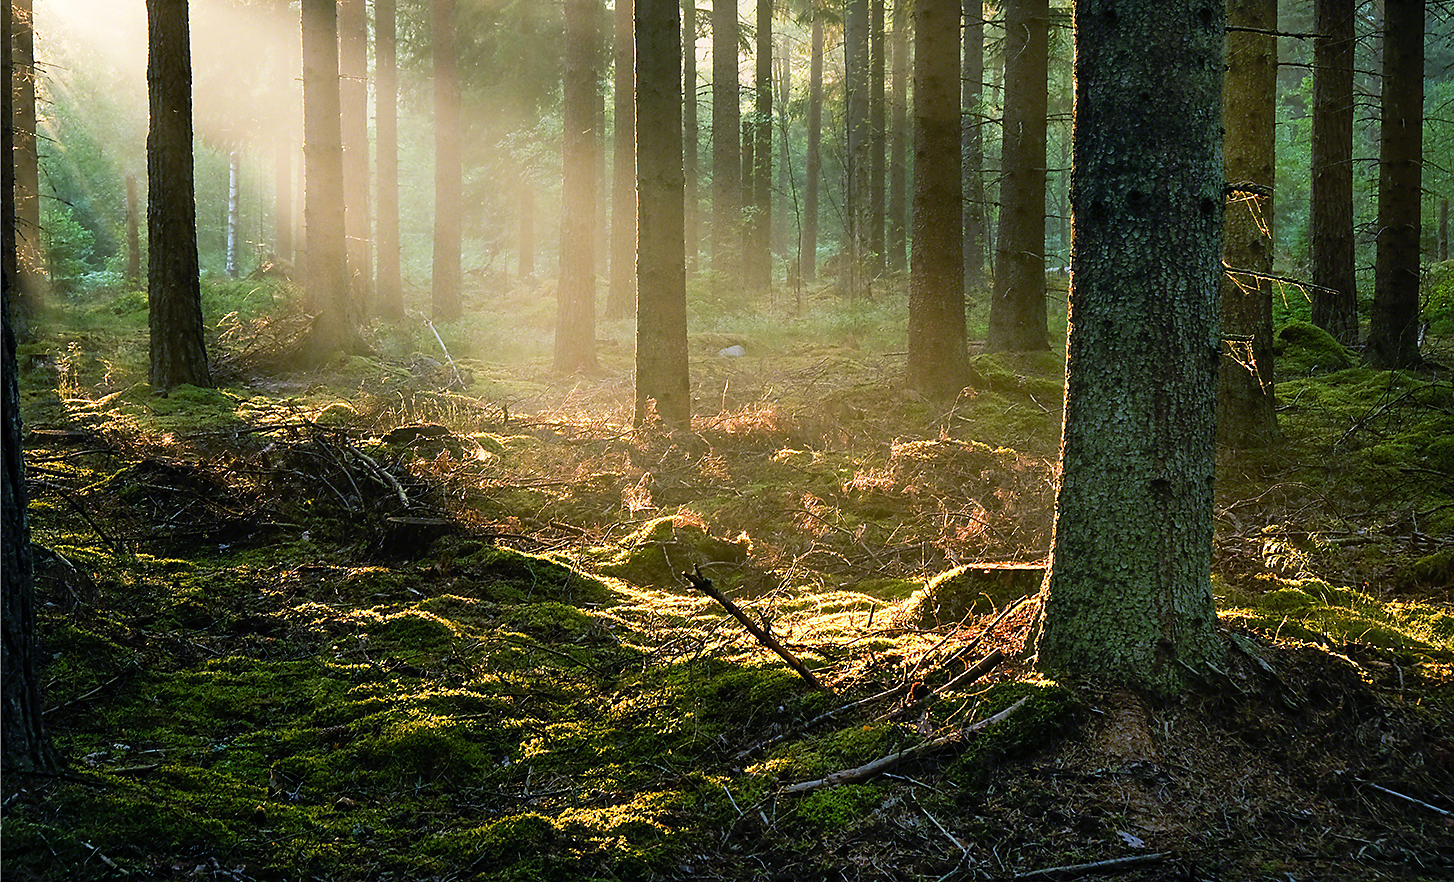 A woodland scene with bright sunlight streaming through the trees